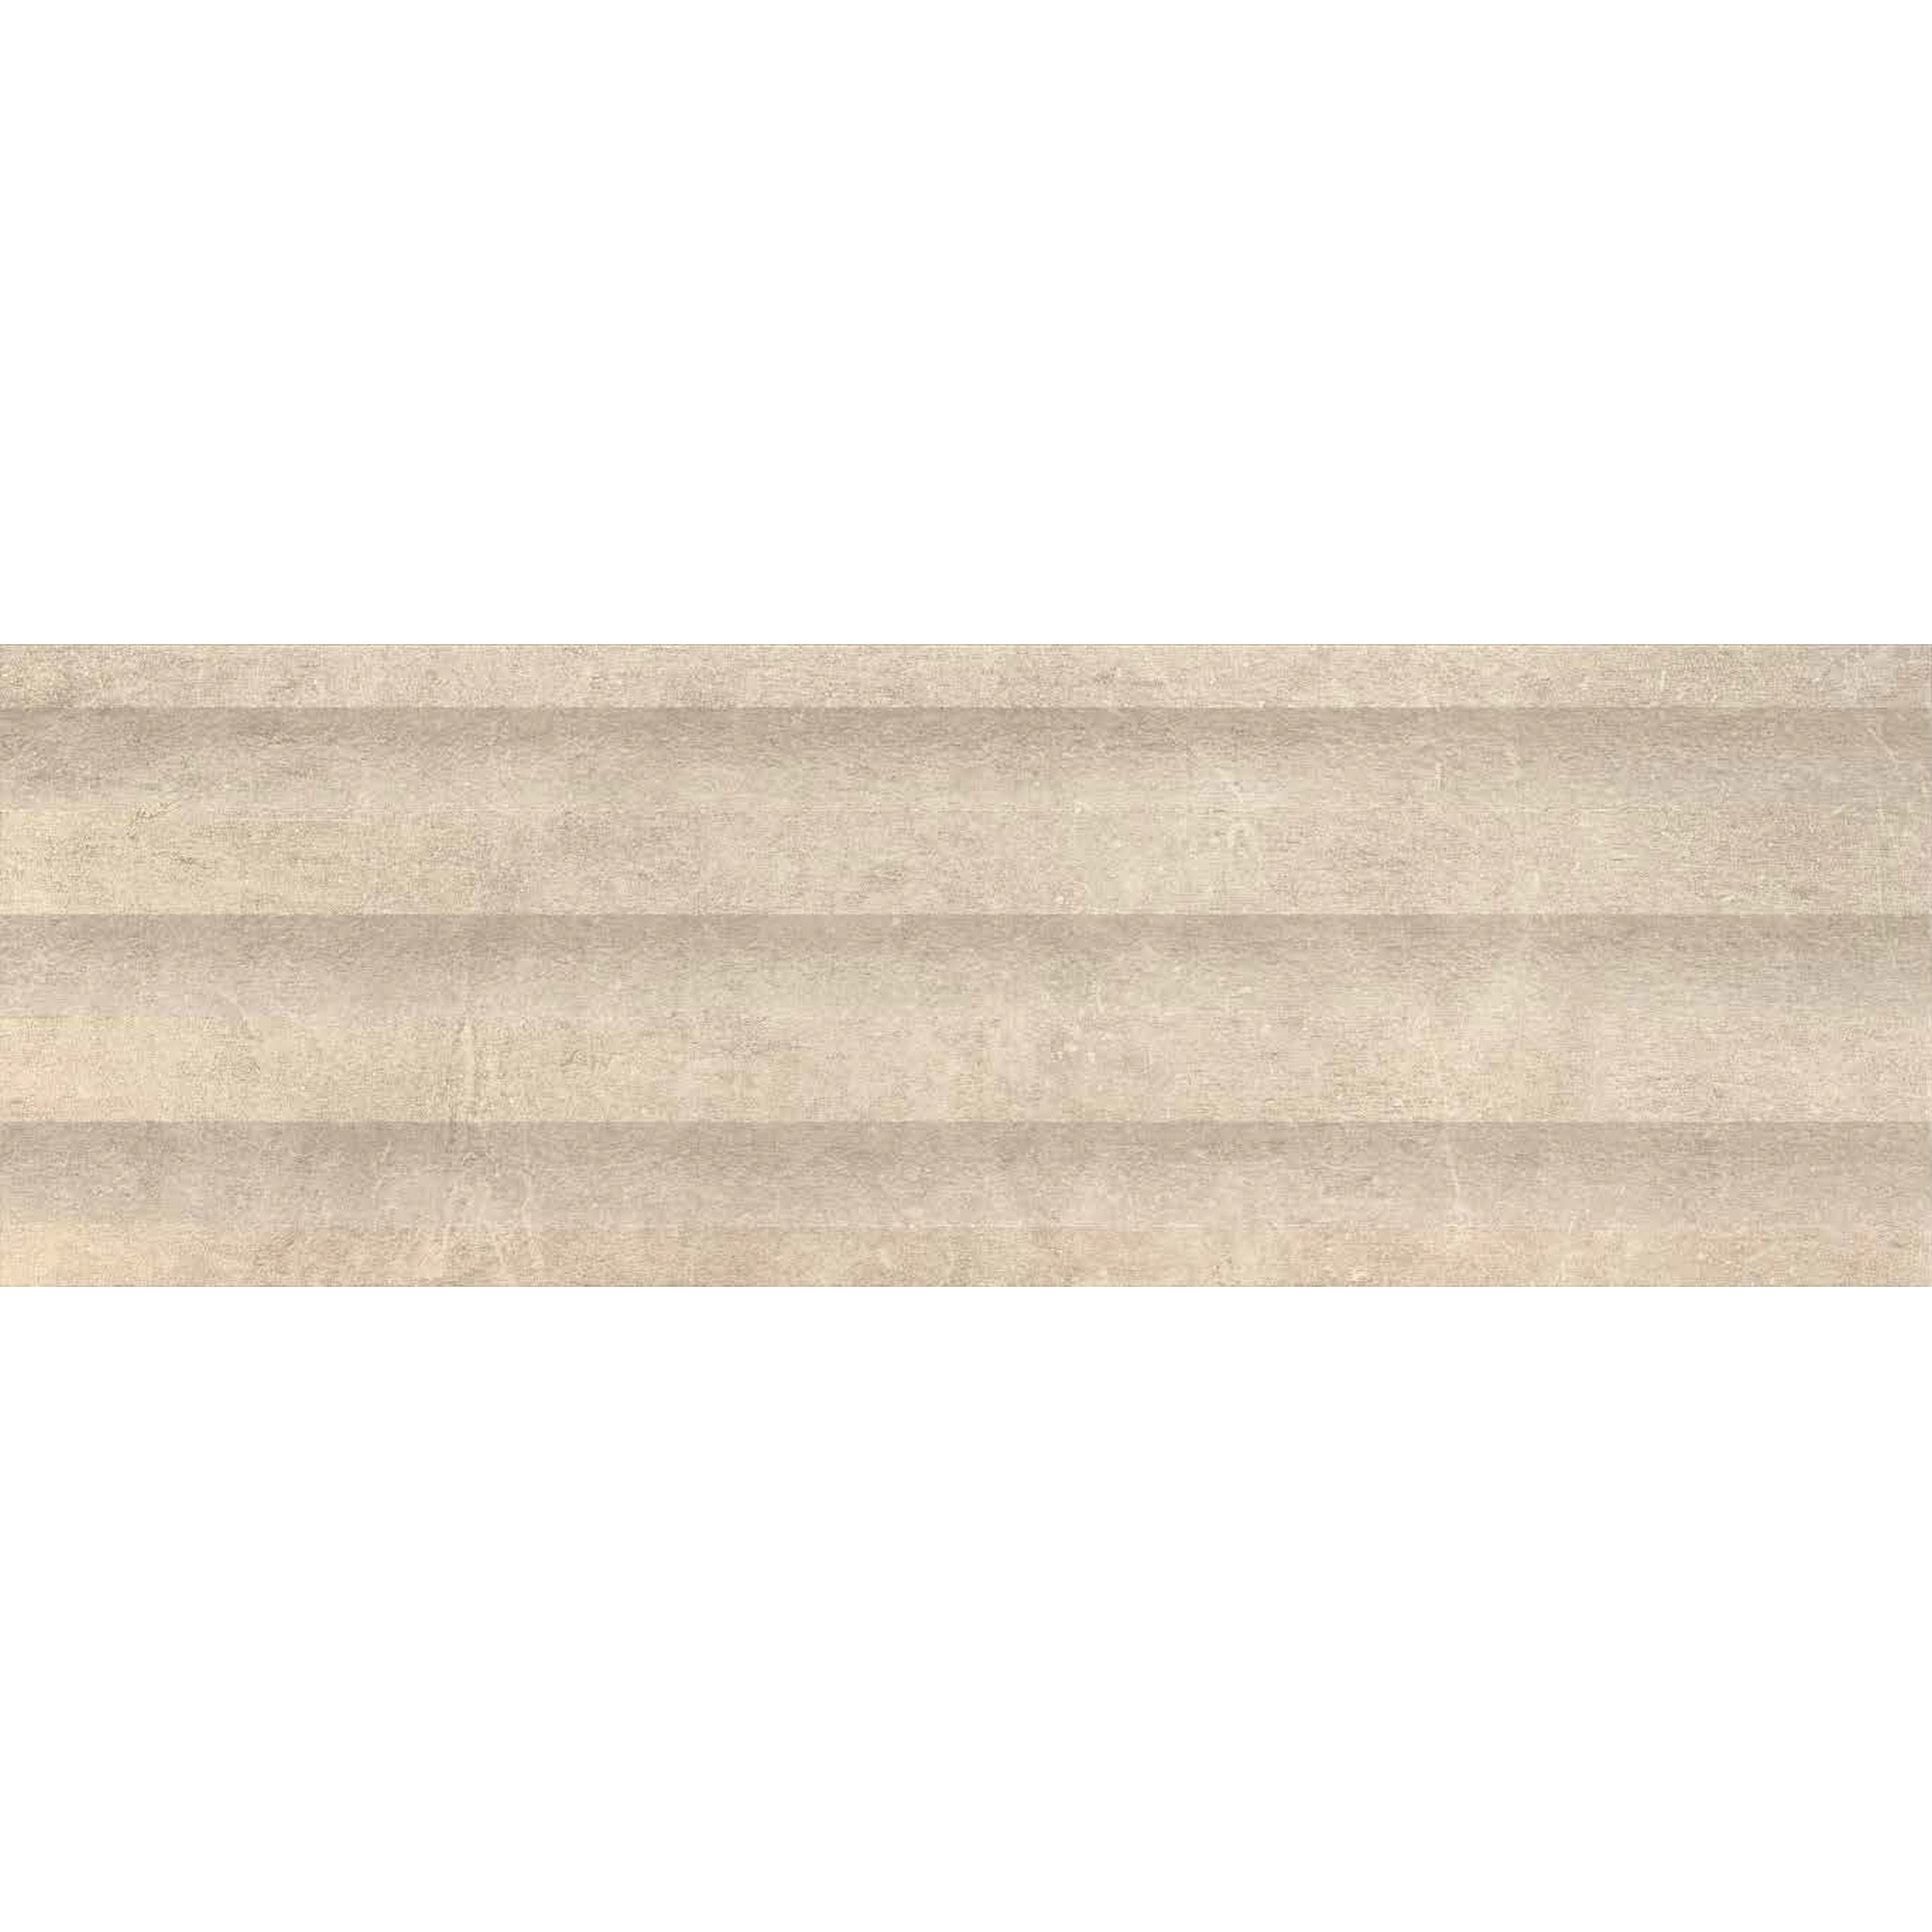 Wandfliese 'Pompeya Leeds' Steingut taupe 30 x 90 cm + product picture